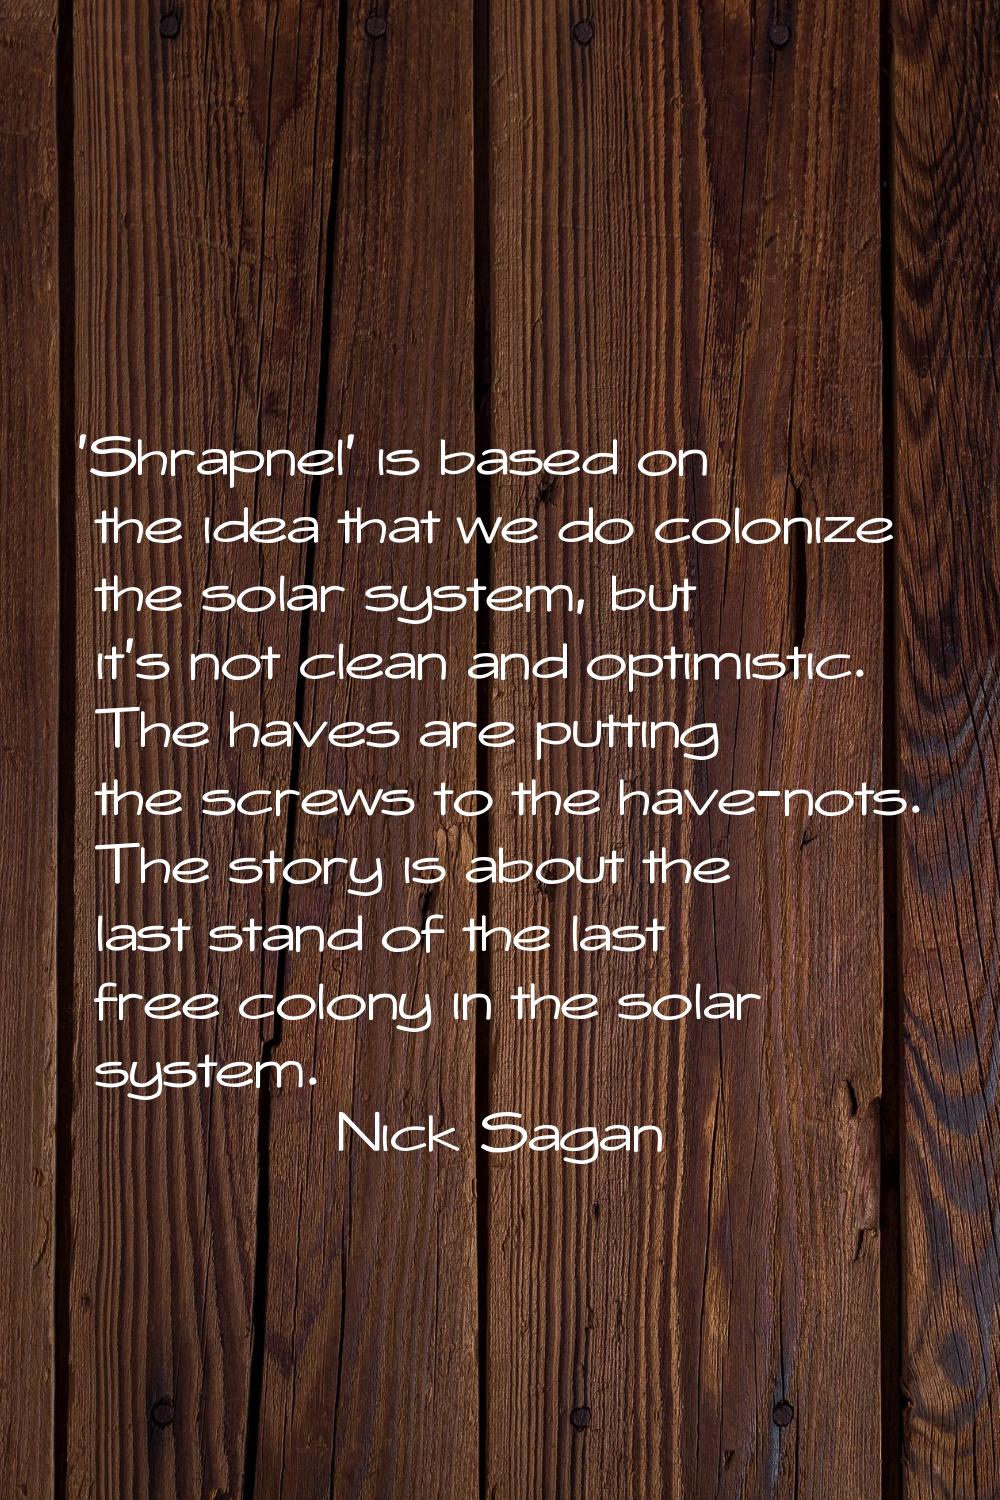 'Shrapnel' is based on the idea that we do colonize the solar system, but it's not clean and optimi